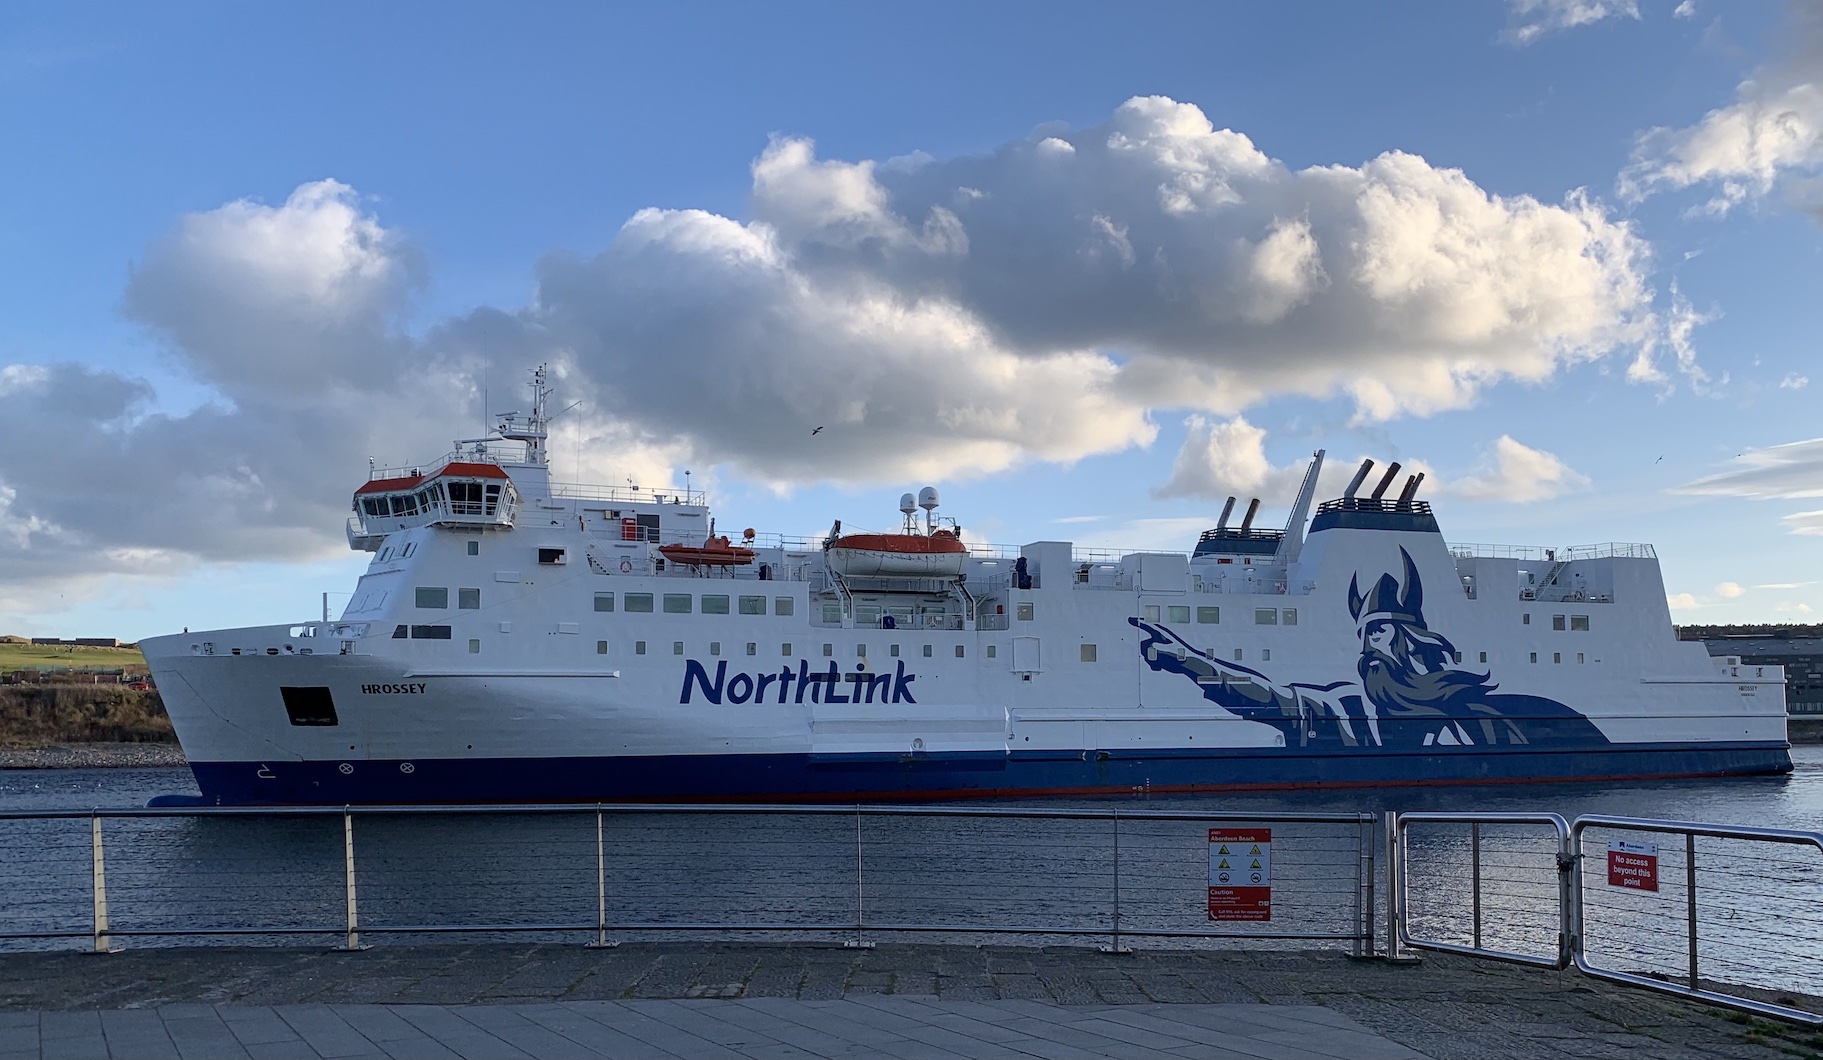 The North Link ferry leaving Aberdeen for Orkney and Shetland.